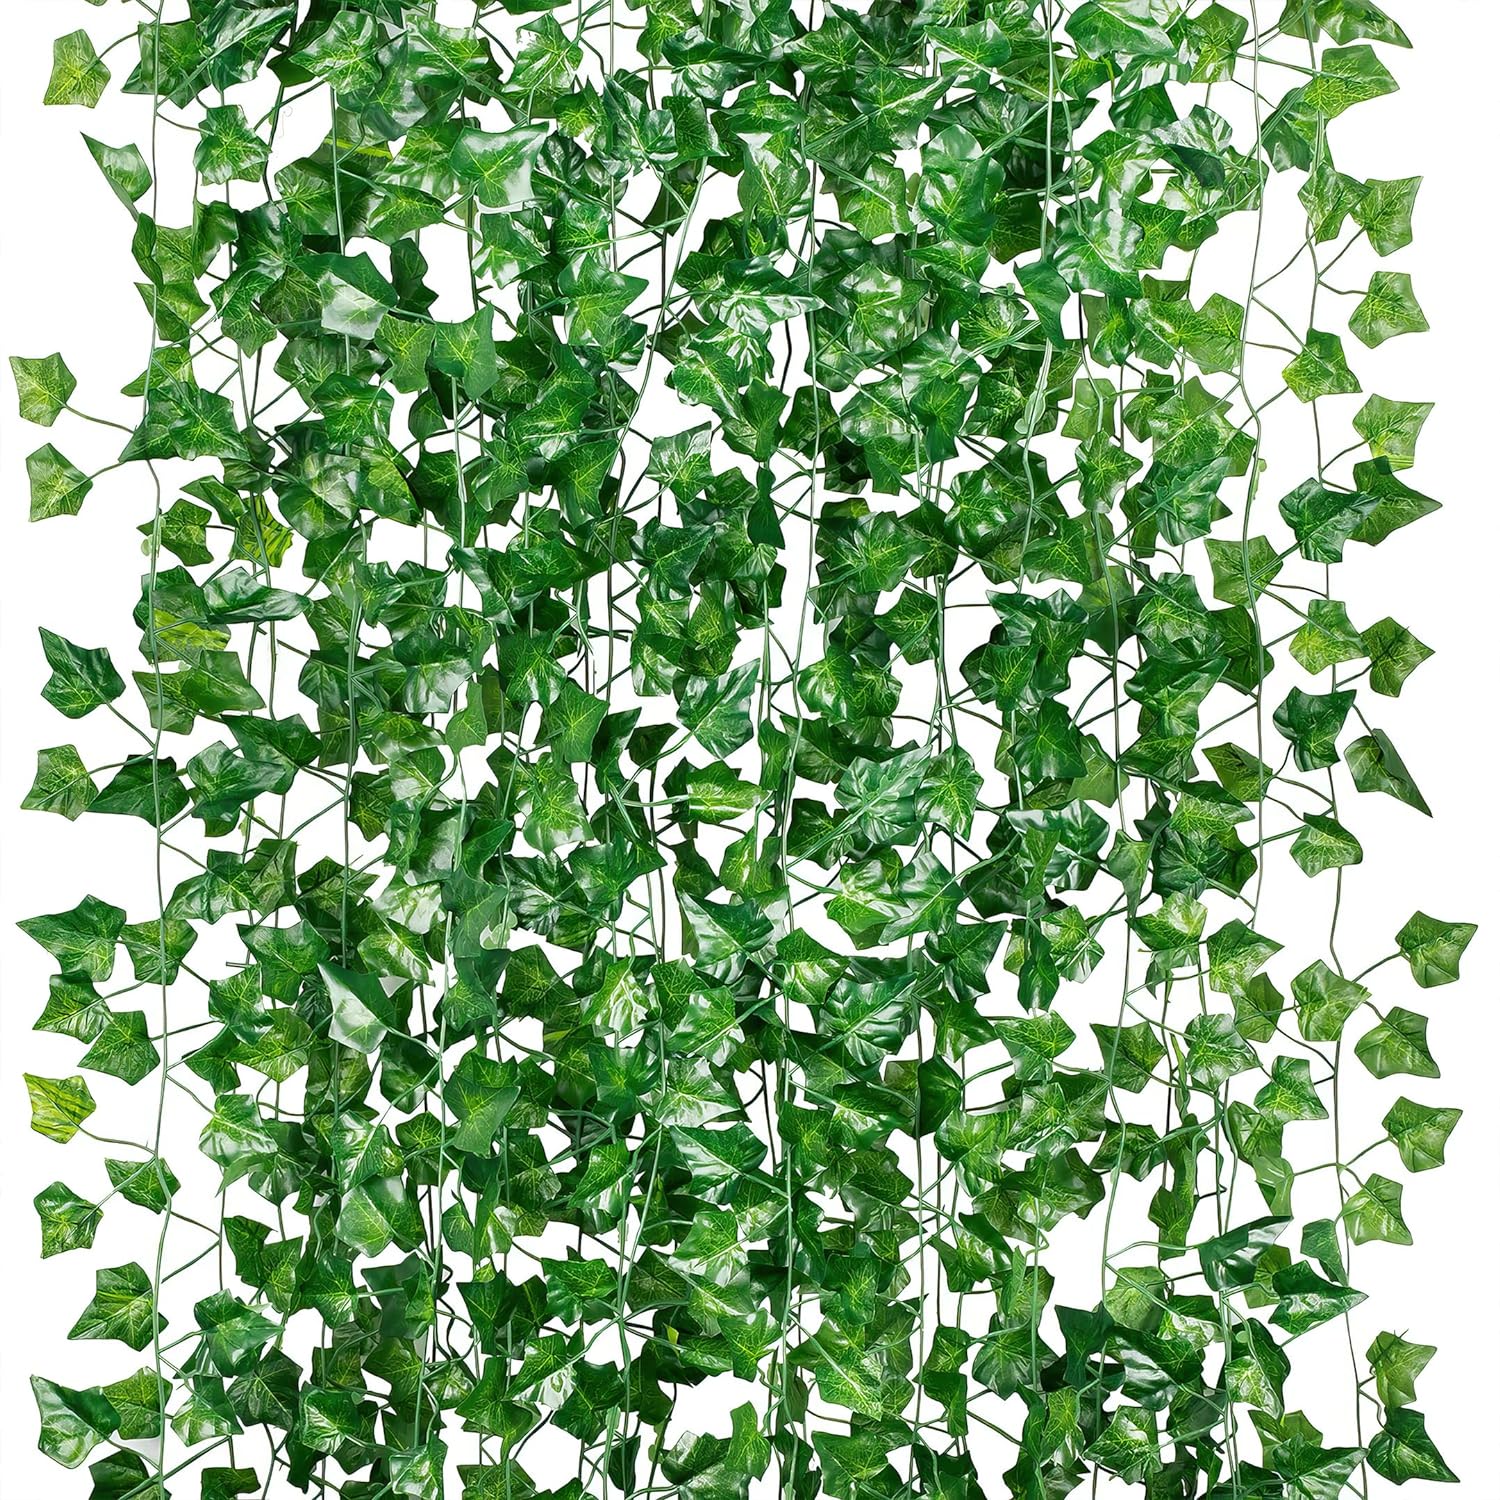 Artificial Green Leaves Vines for Decoration Wall - 6 Pieces